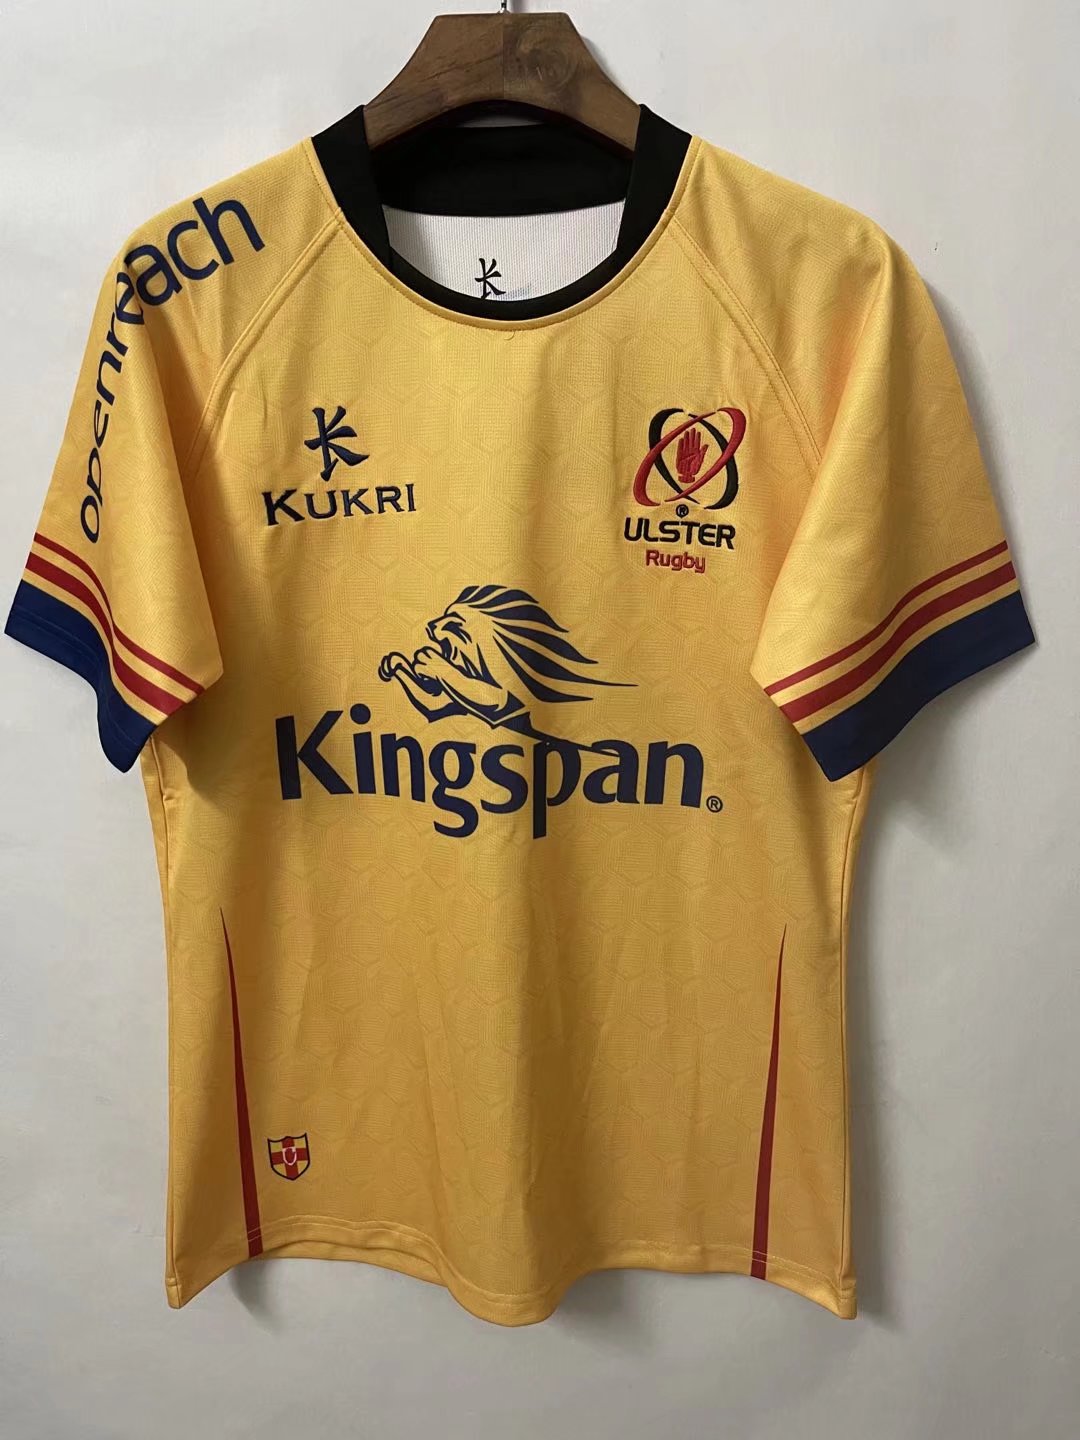 2020-2021 ULSTER Yellow Thailand Rugby Shirts-805